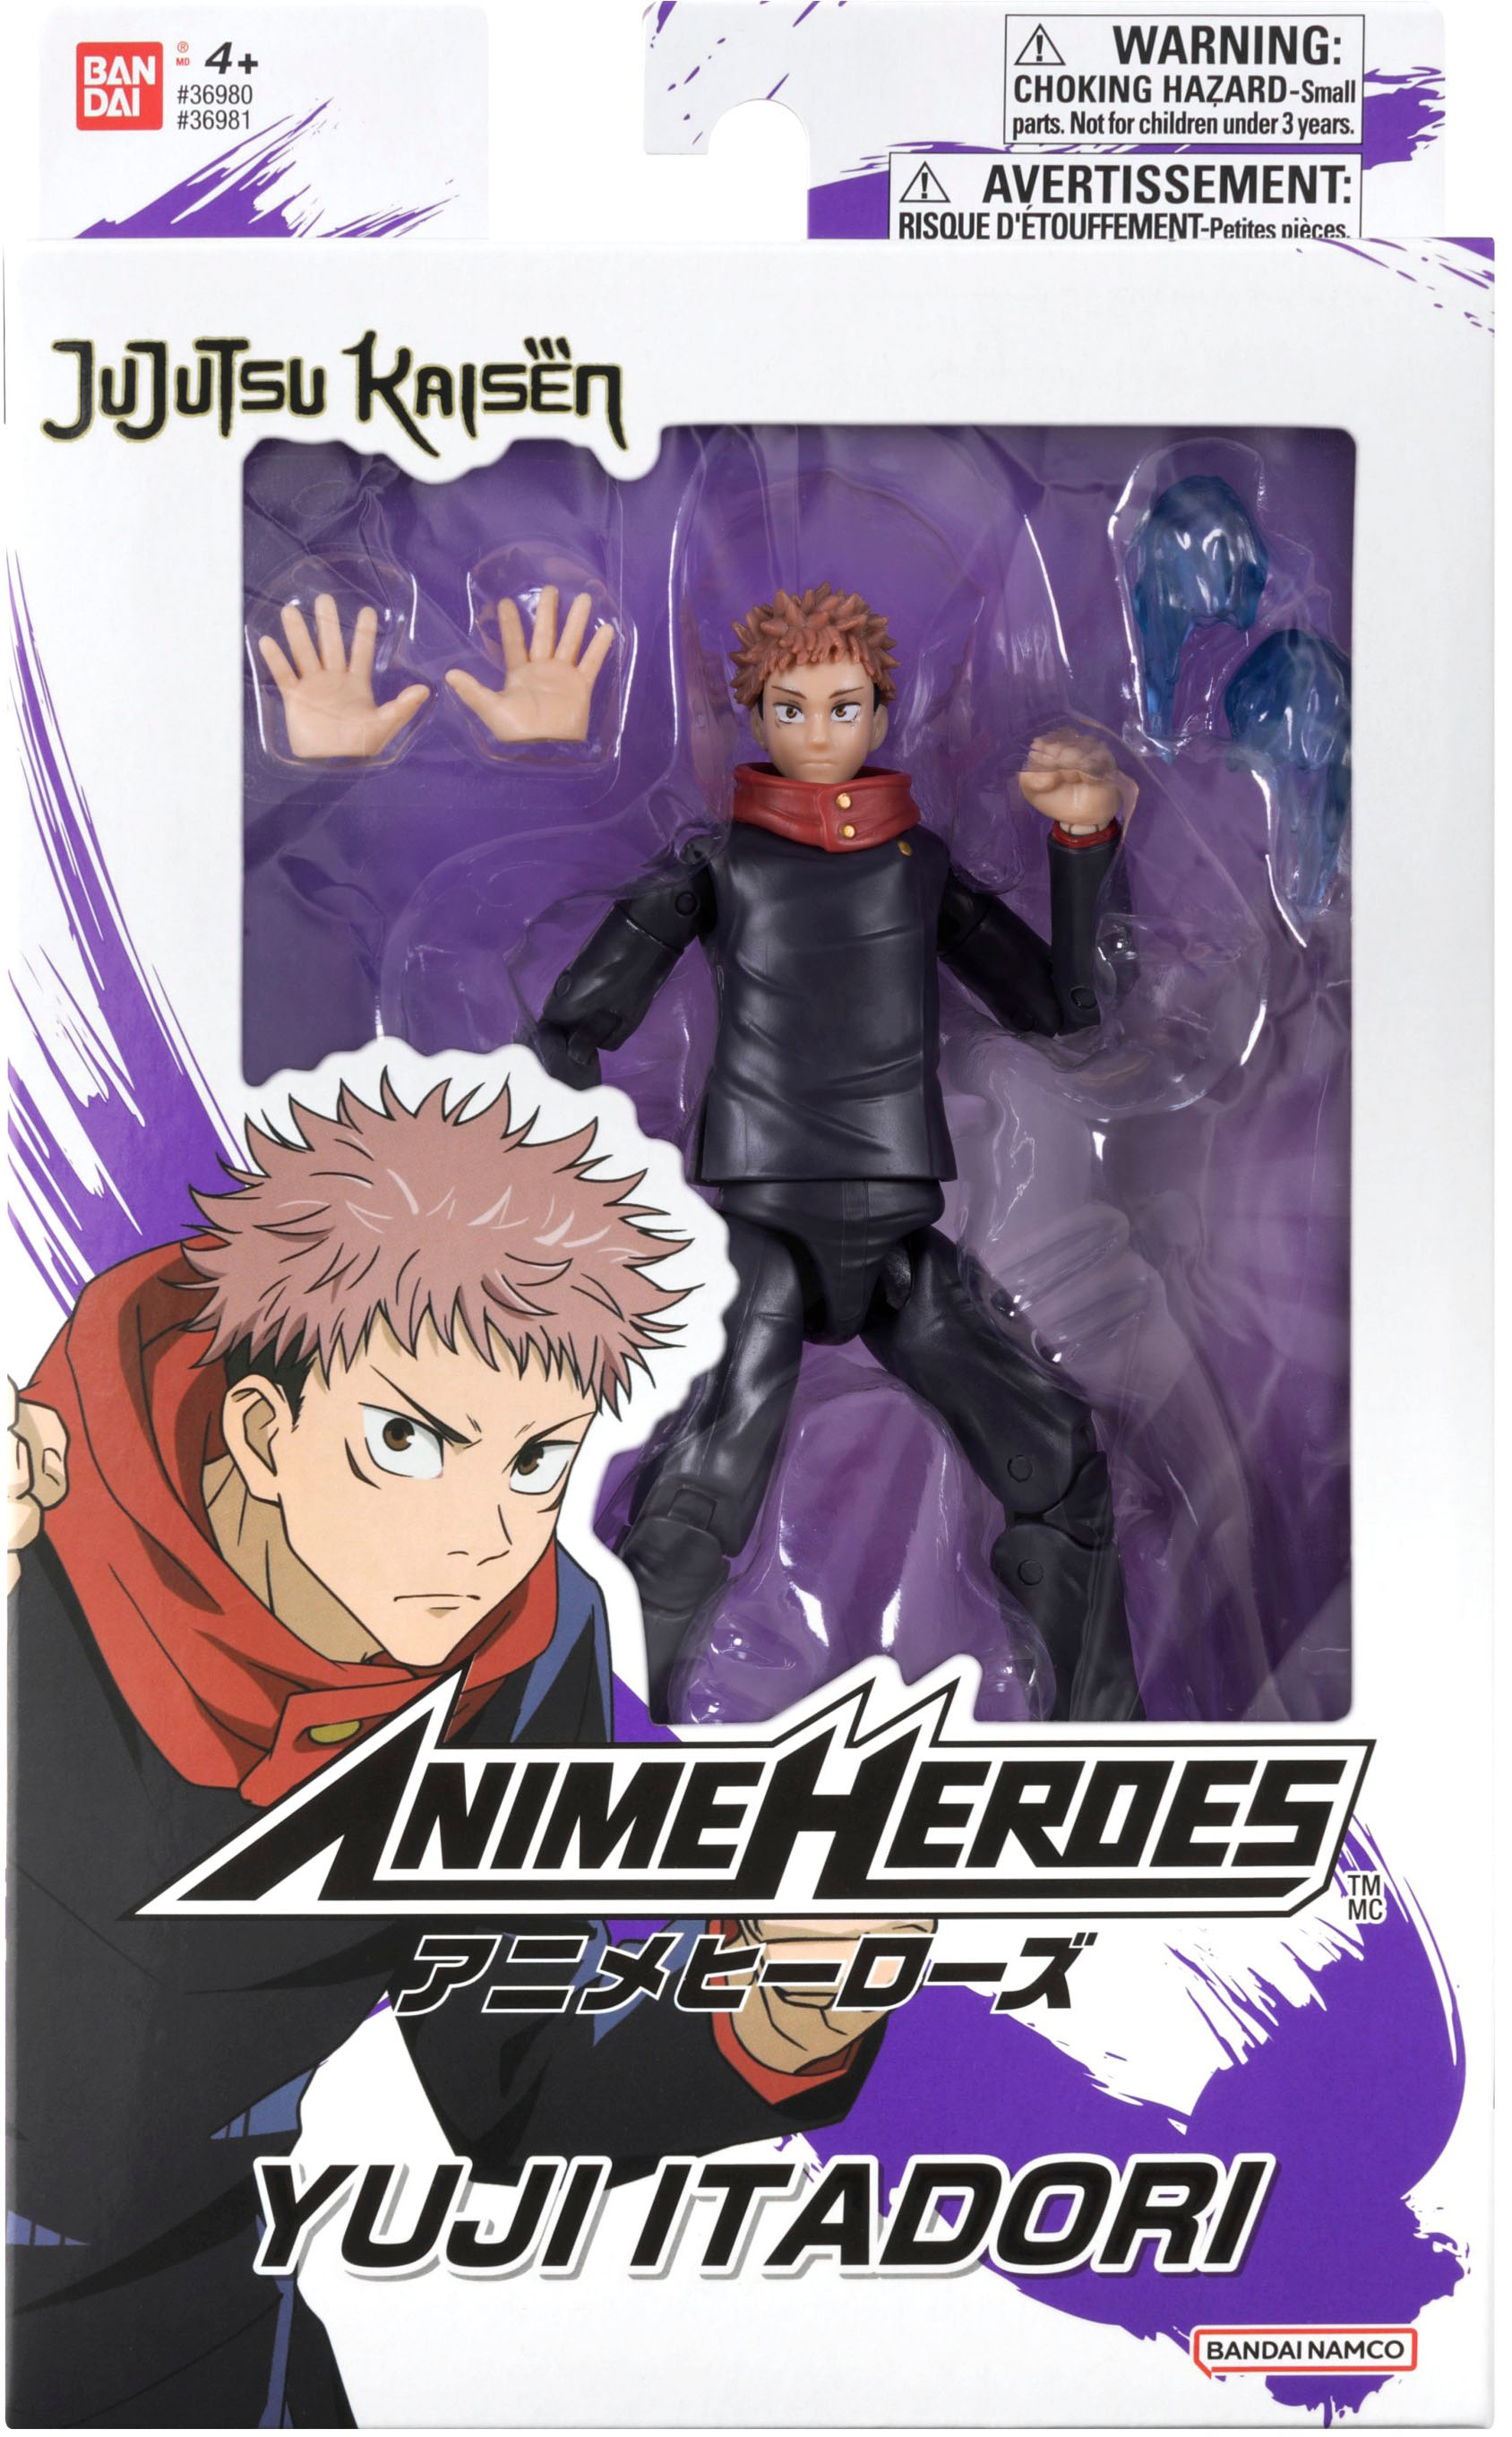 ANIME HEROES - The Toy Insider